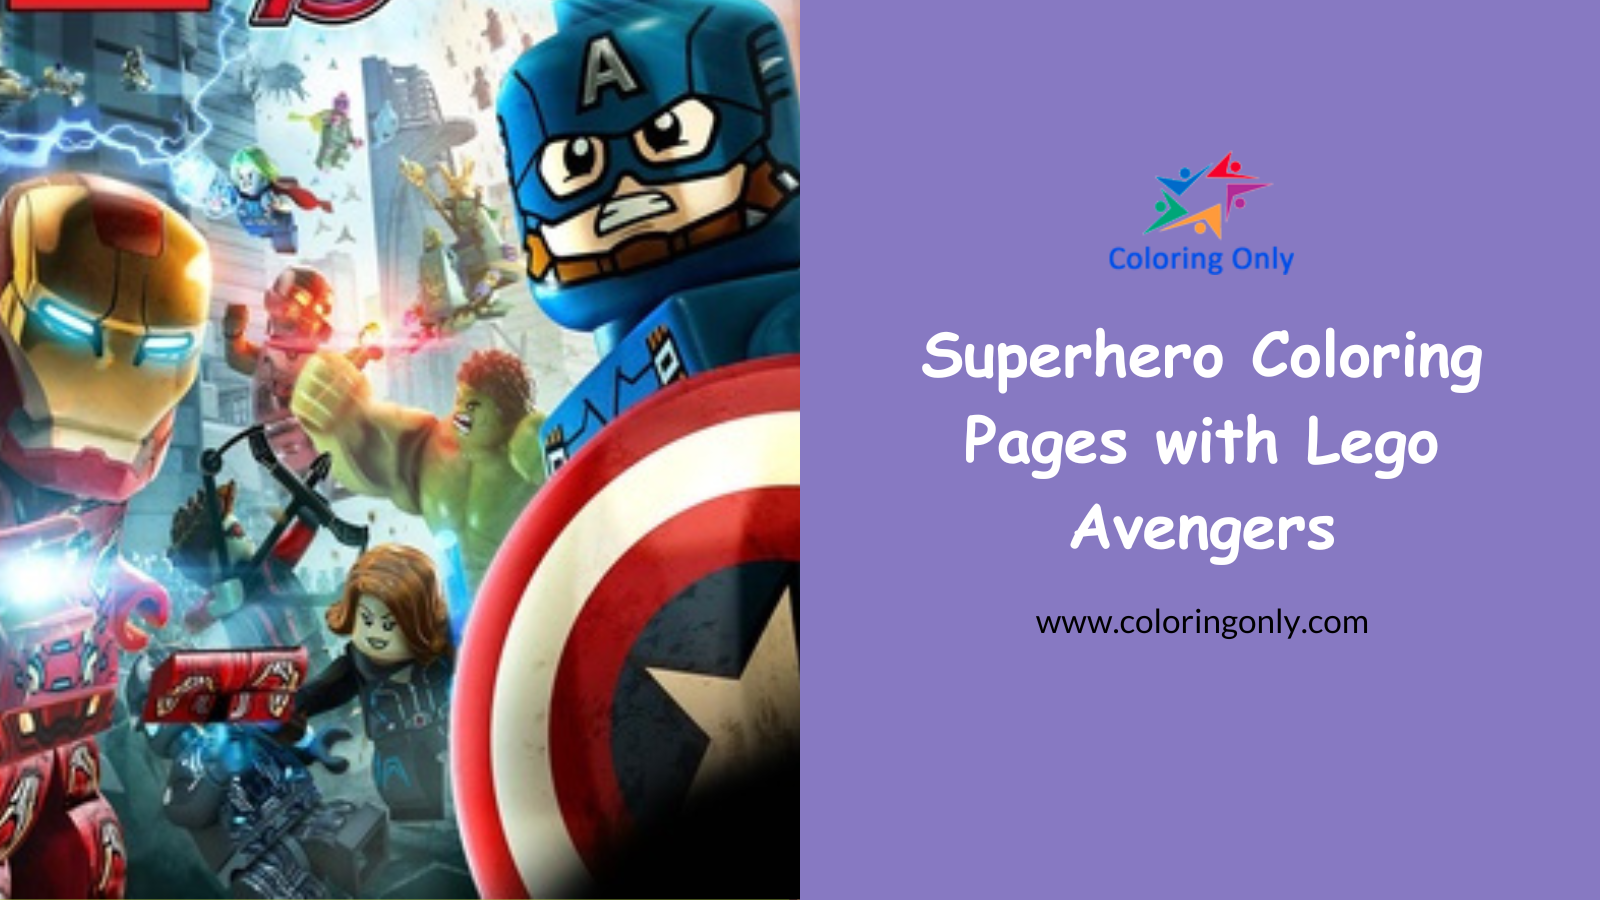 Superhero Coloring Pages with Lego Avengers